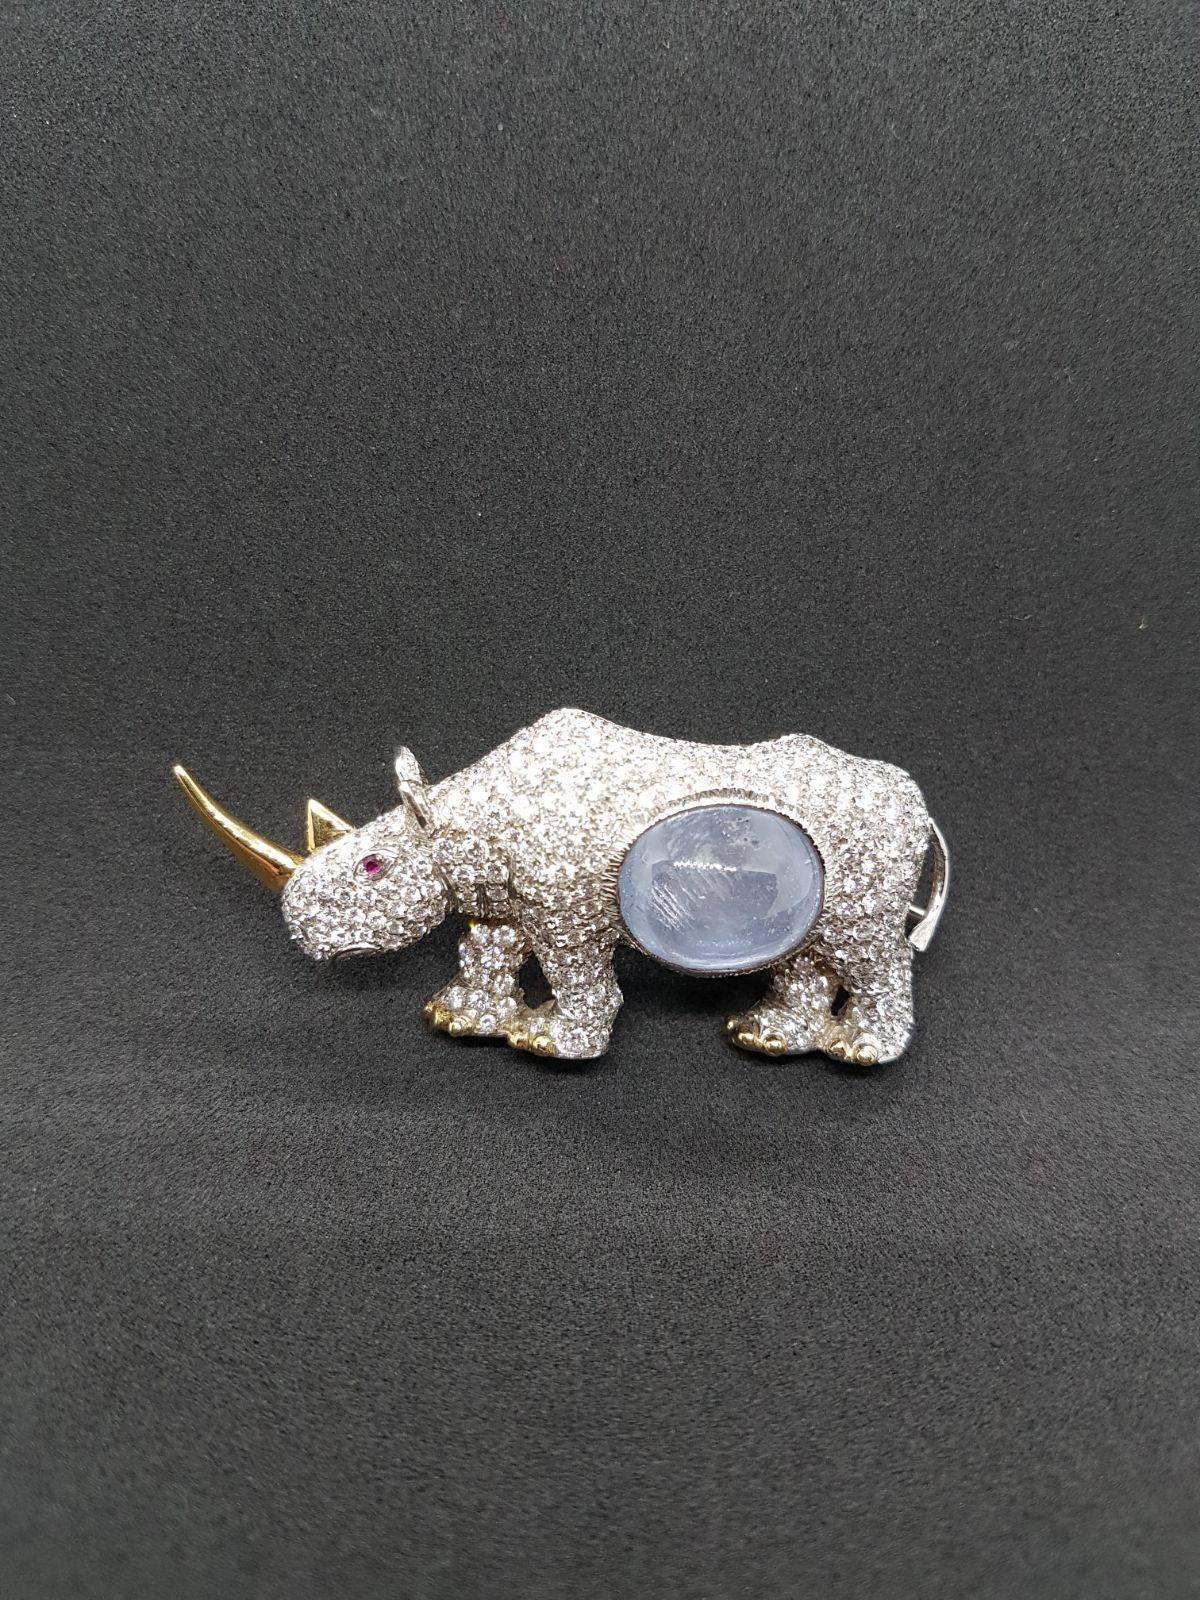 Rhinoceros Broach in White and Yellow Gold with Diamonds and a Sapphire Cabochon In Excellent Condition For Sale In Venice, IT